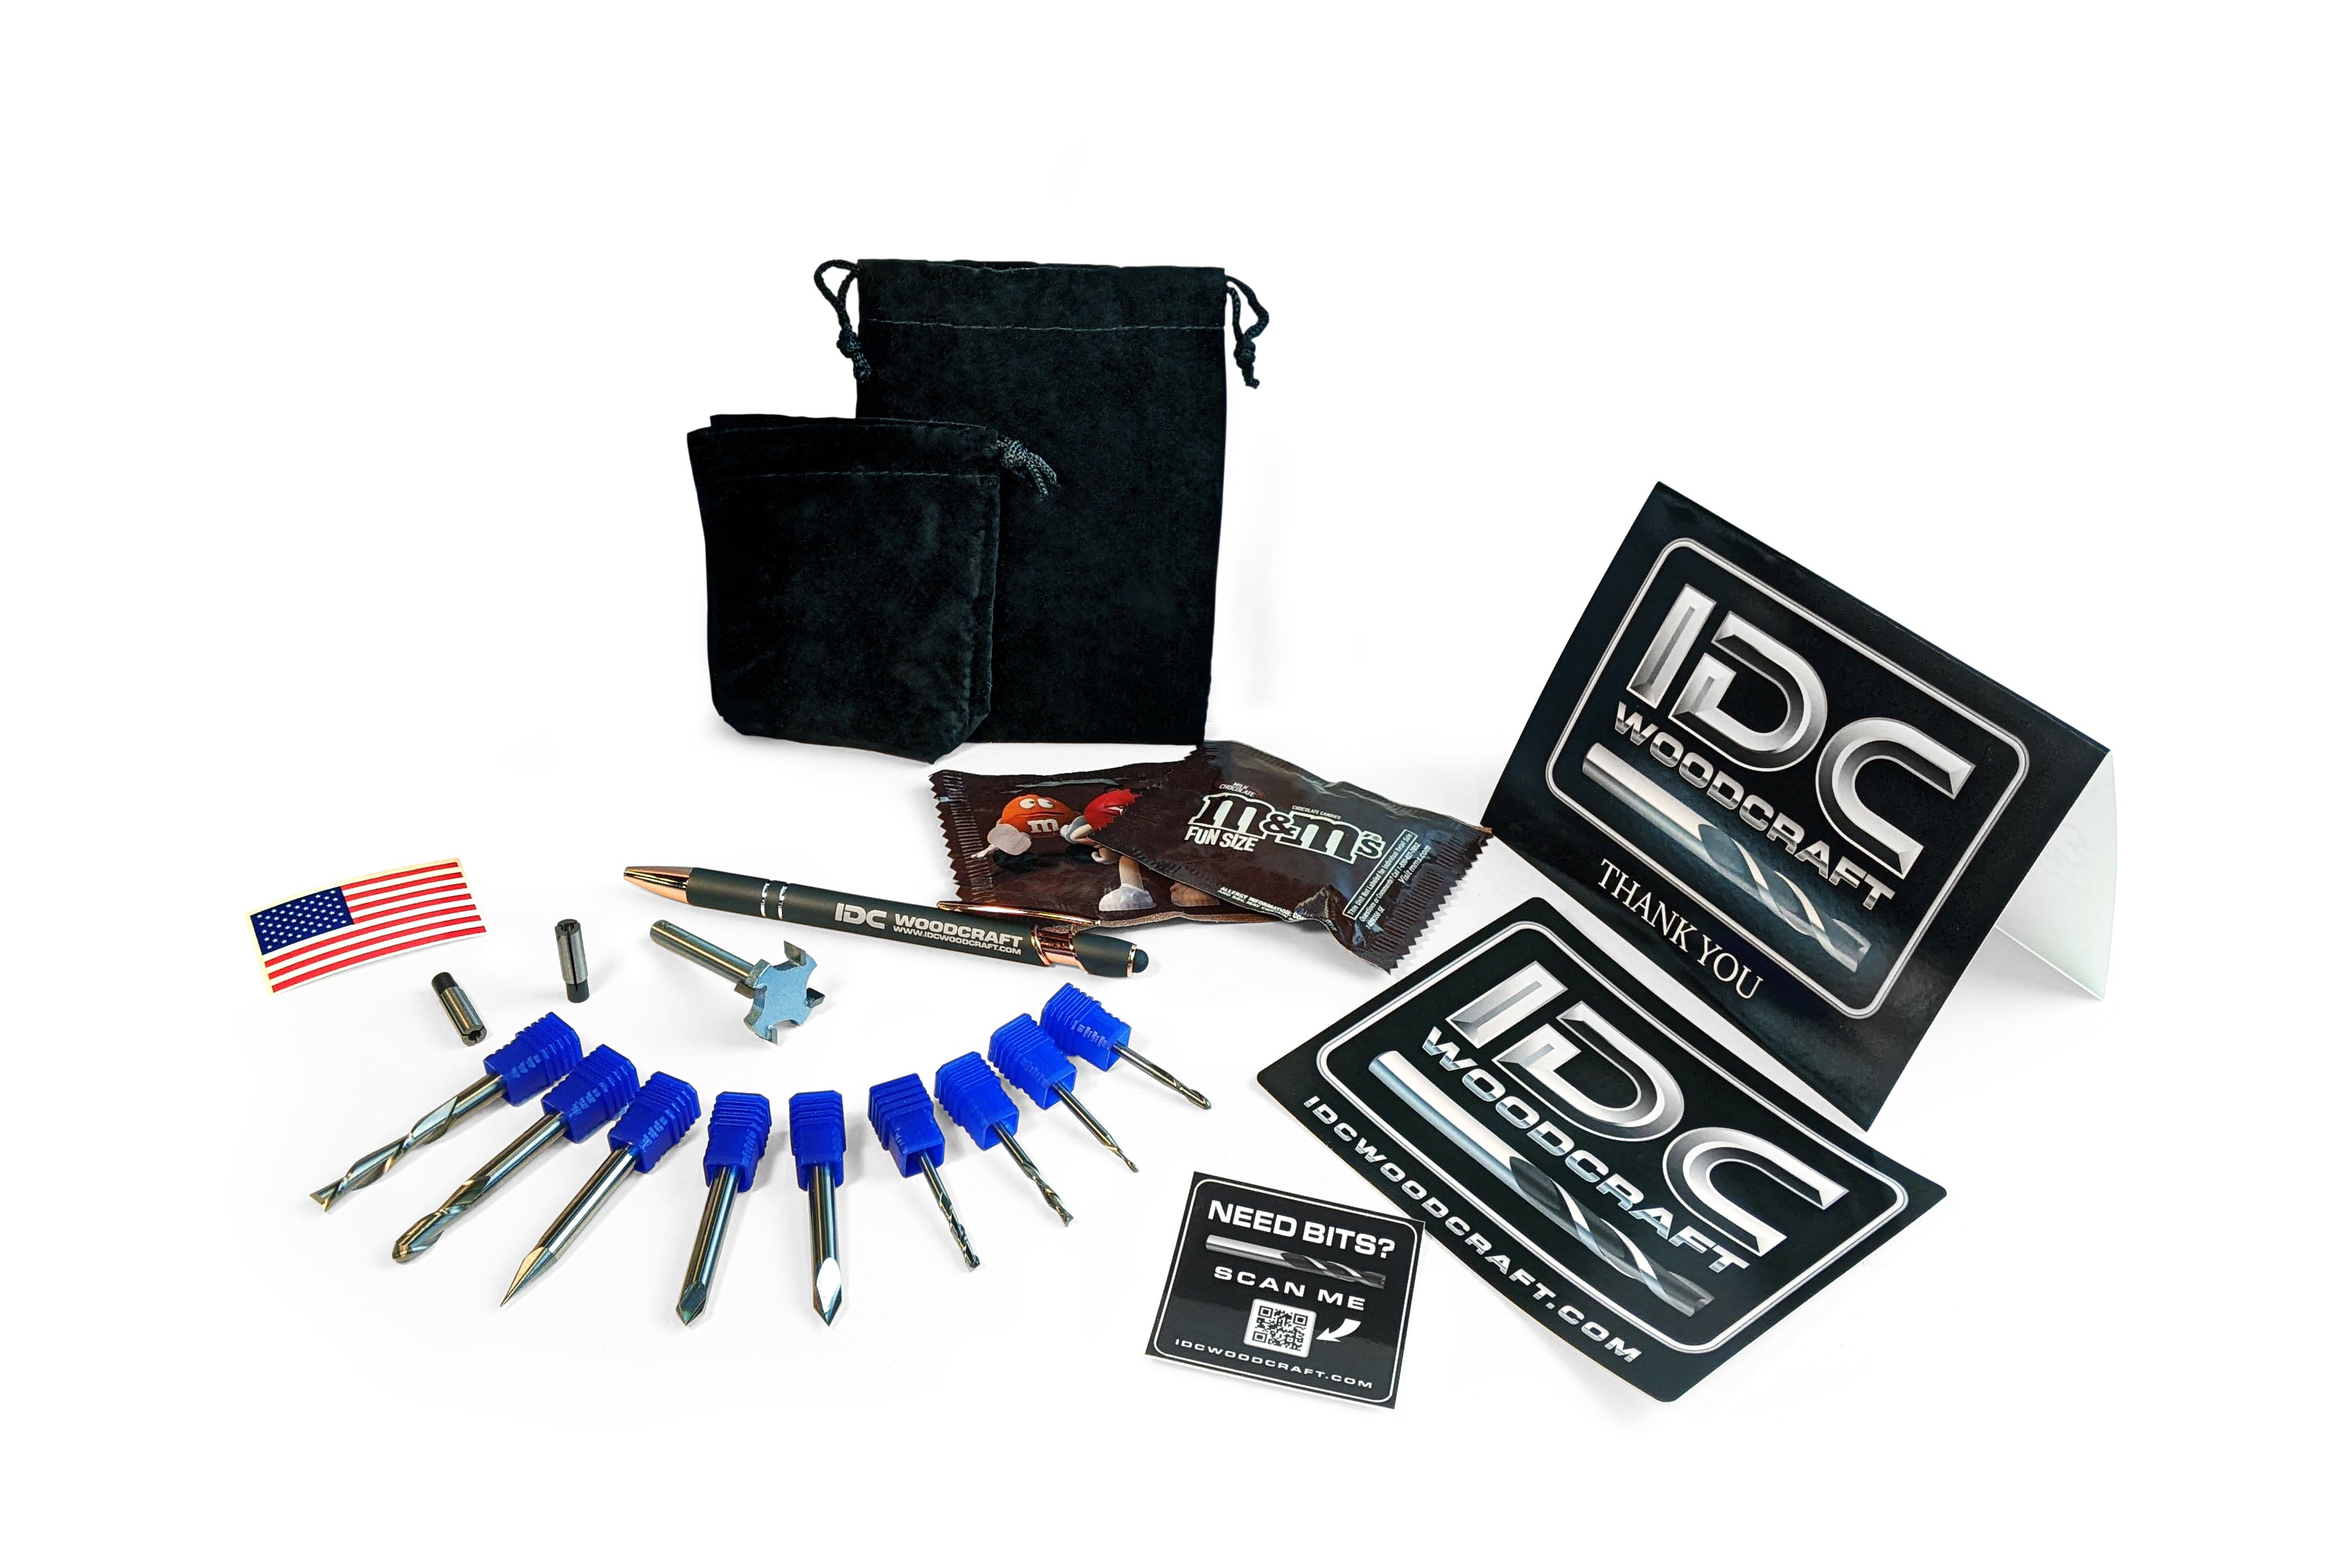 IDC Woodcraft complete router bit set on table with accessories